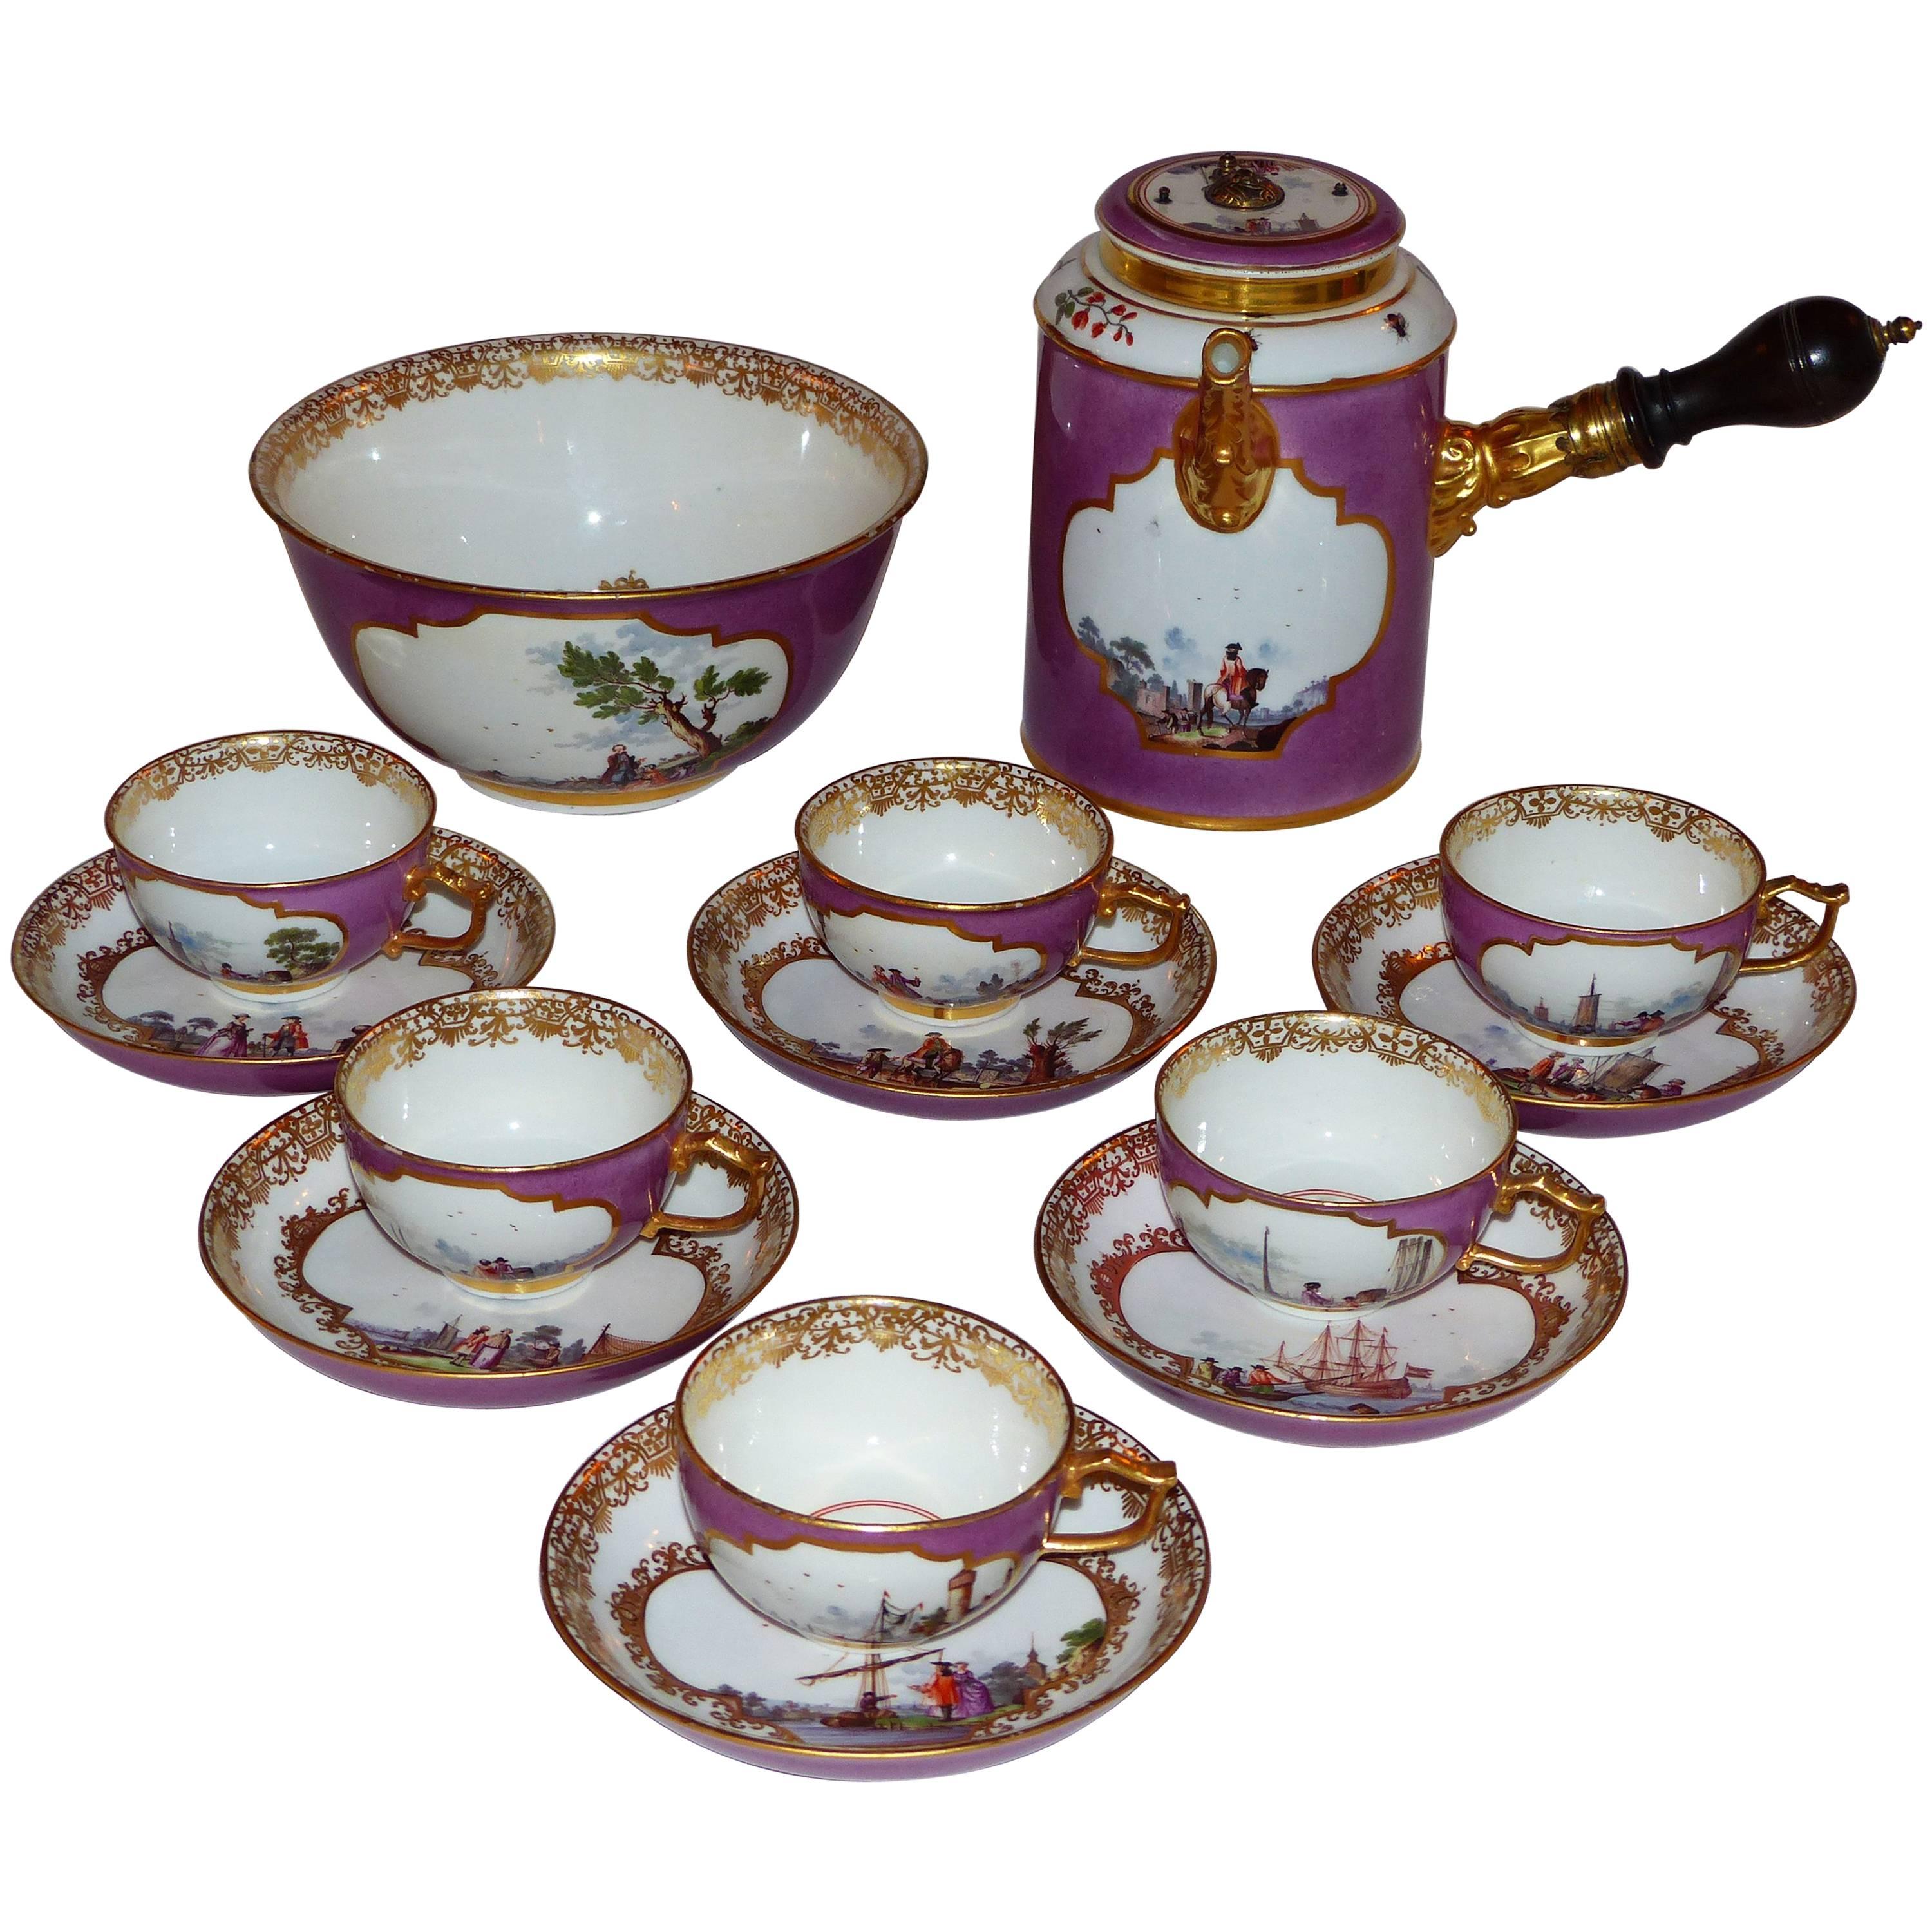 Exclusive Antique Meissen Service by Christian F. Herold, 1735-1740, Rare For Sale